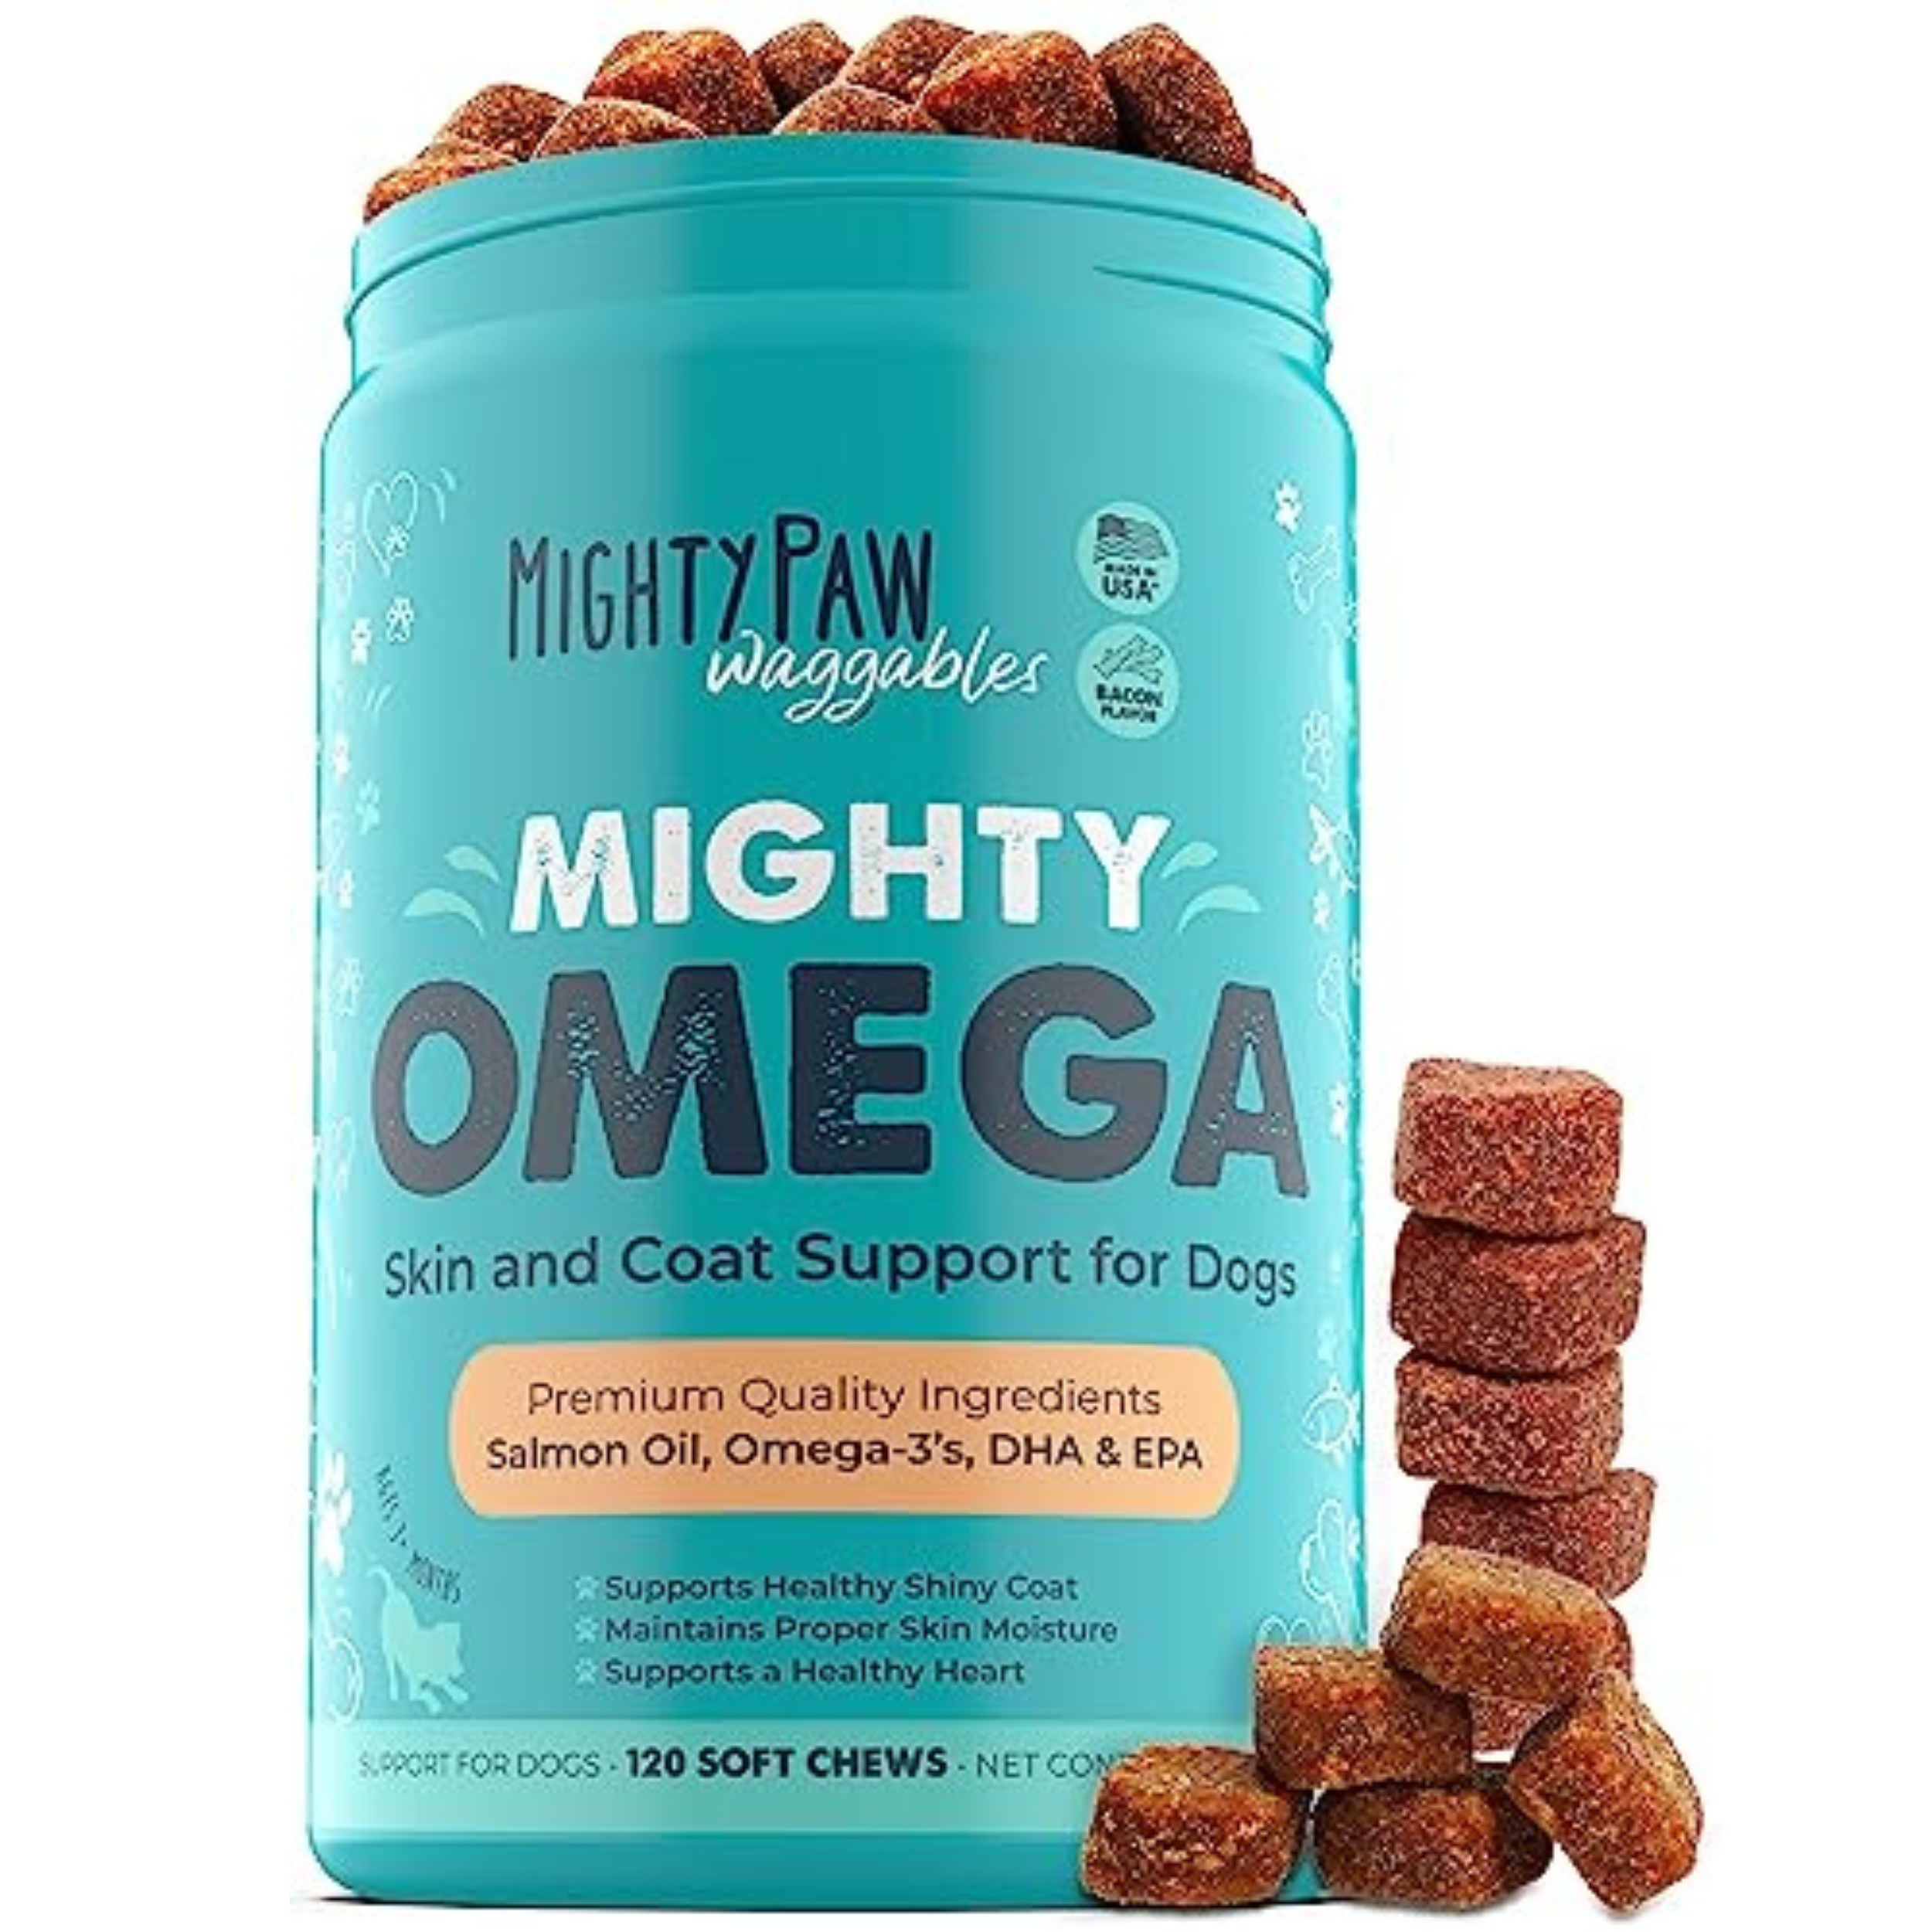 Mighty Omega Salmon Oil Supplement: A Treat for Healthy Skin and Coat